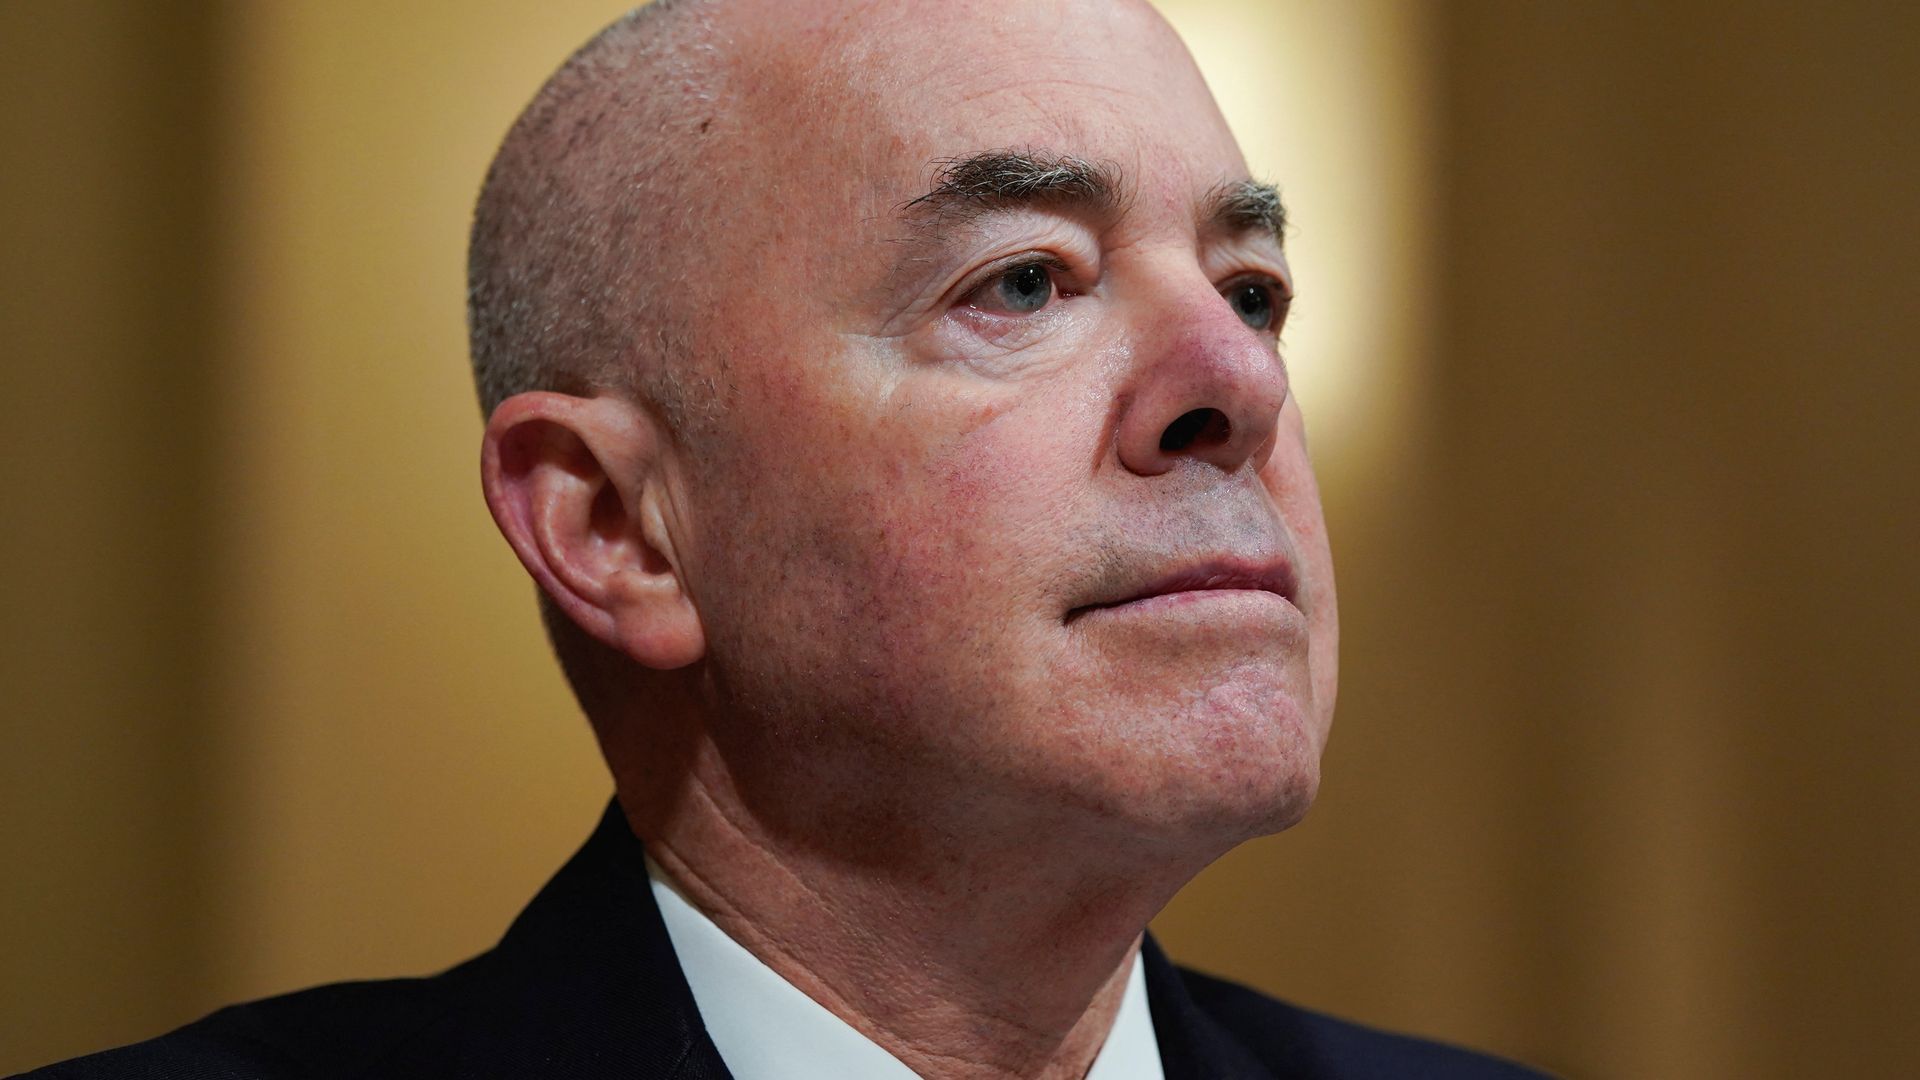 DHS secretary signals amnesty could be used to address border crisis